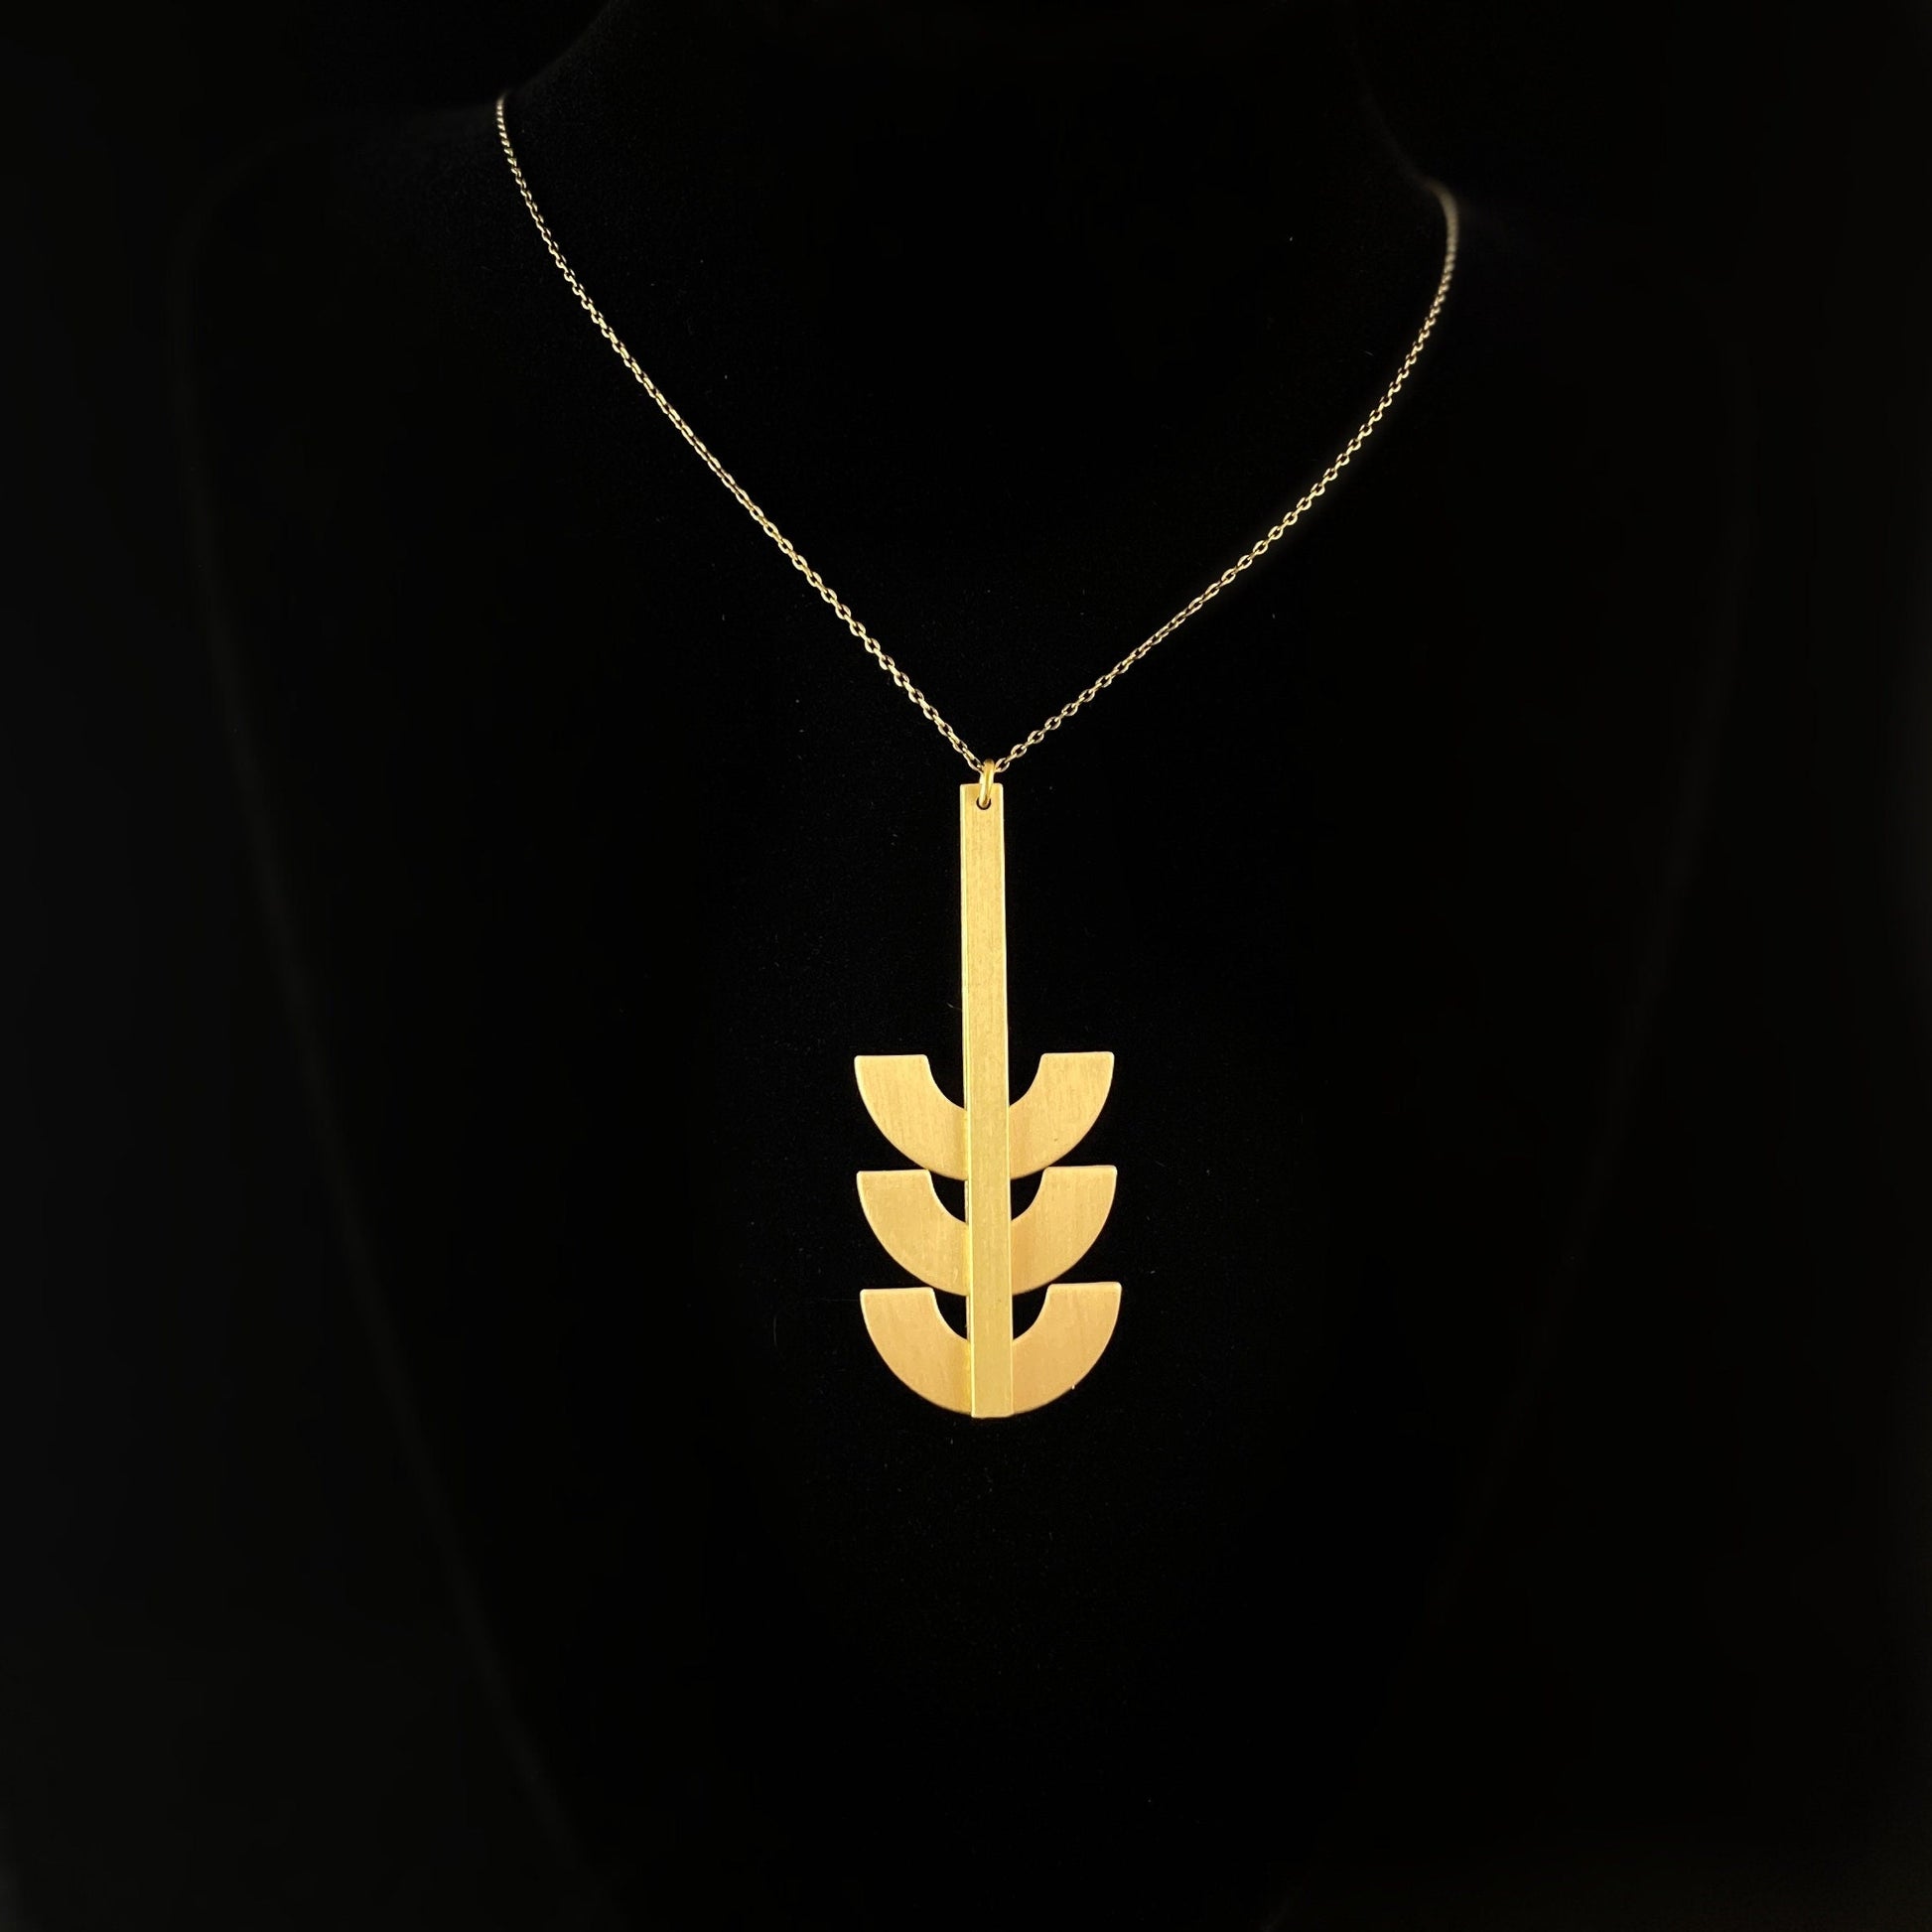 Gold Geometric Art Deco Pendant Necklace - 18kt Gold Abstract Statement Necklace, David Aubrey Jewelry